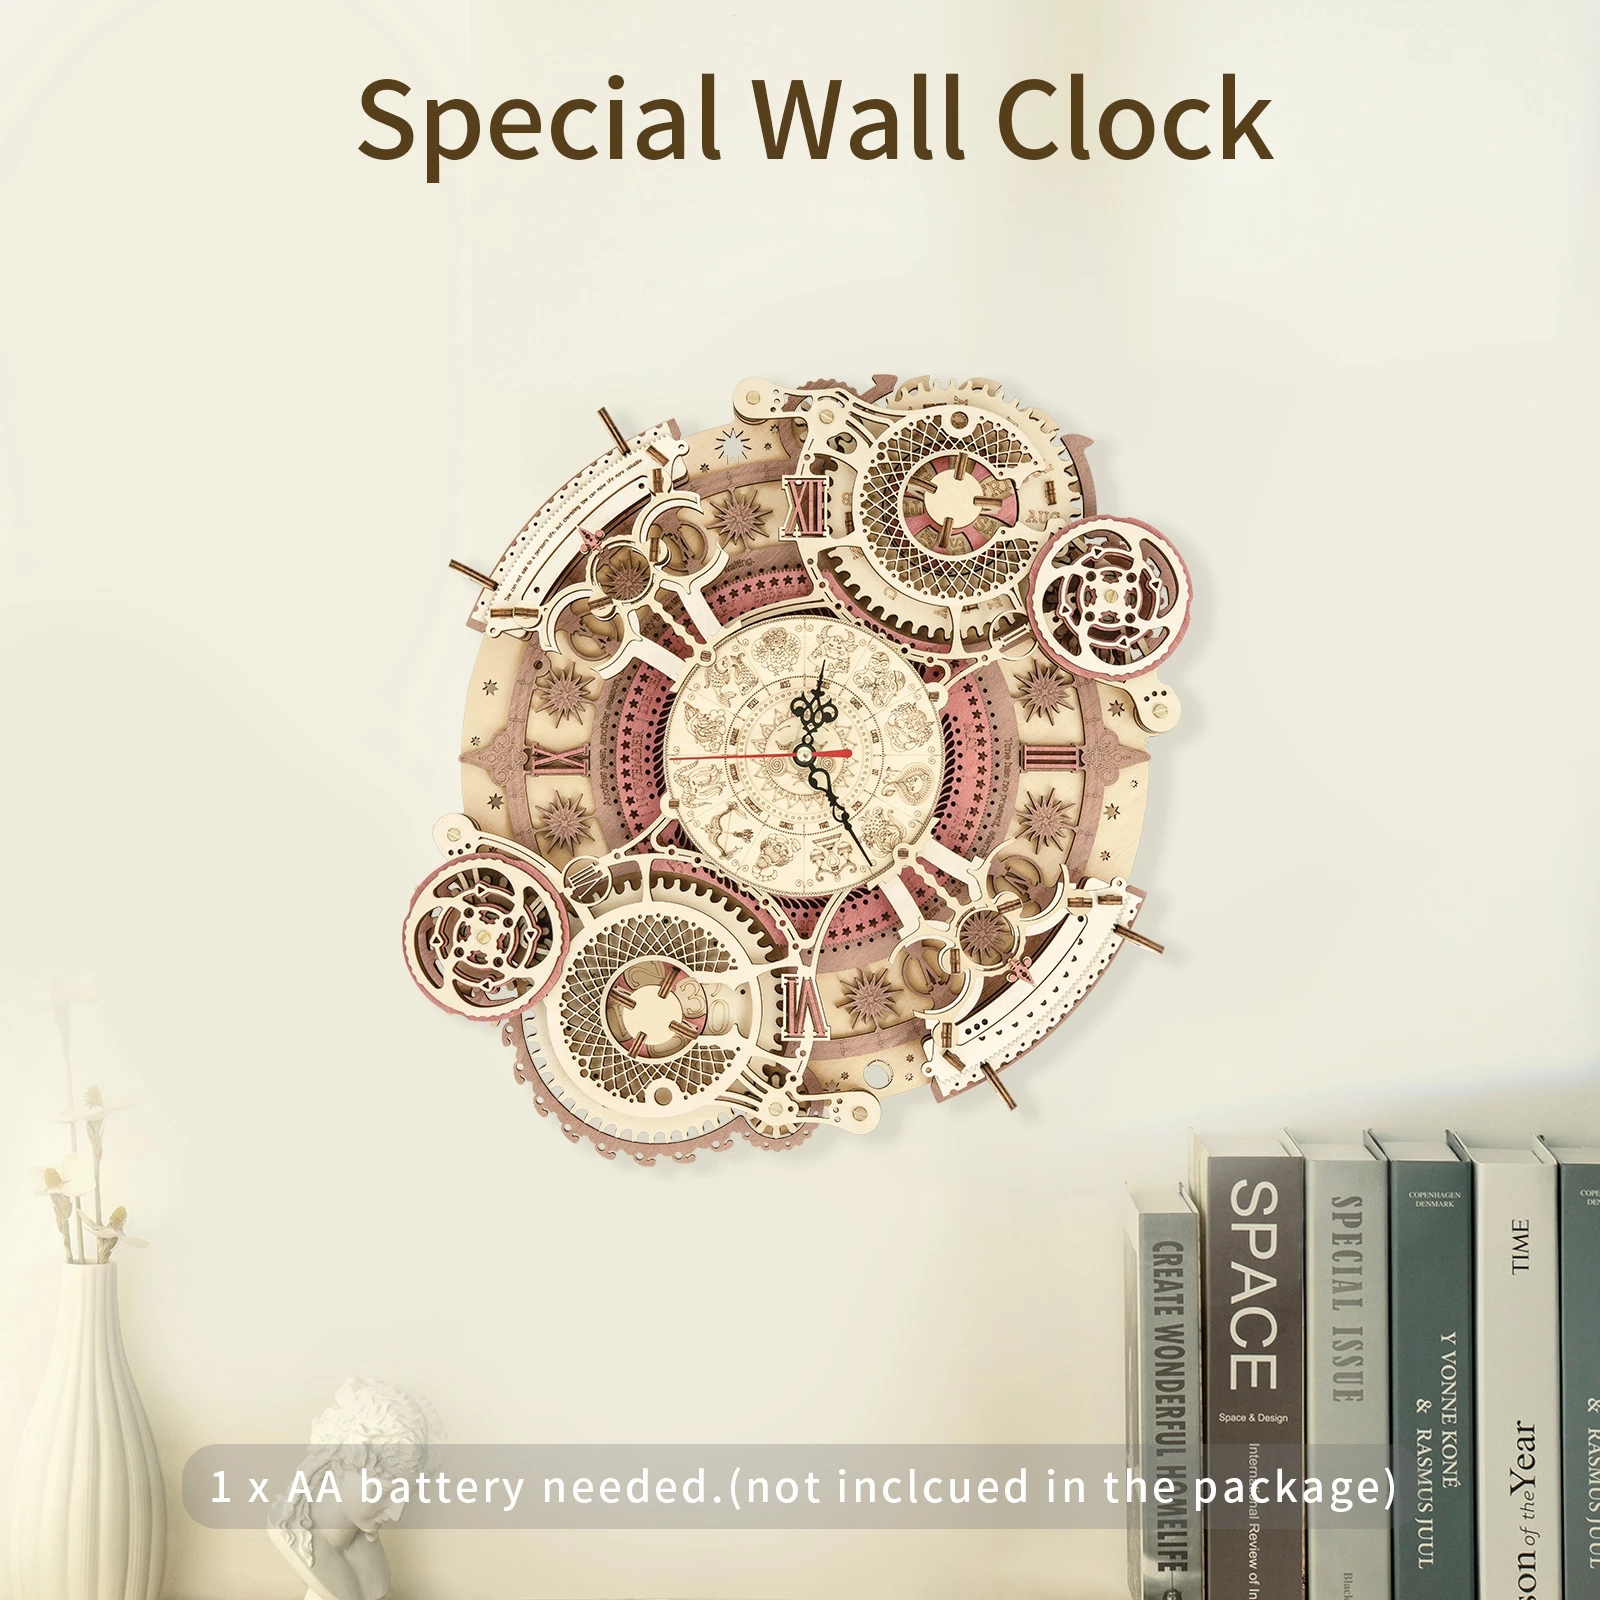 Robotime ROKR Zodiac Wall Clock 3D Wooden Puzzle Model Assembly Toys Gifts for Children Kids Teens LC601 Support Dropshipping